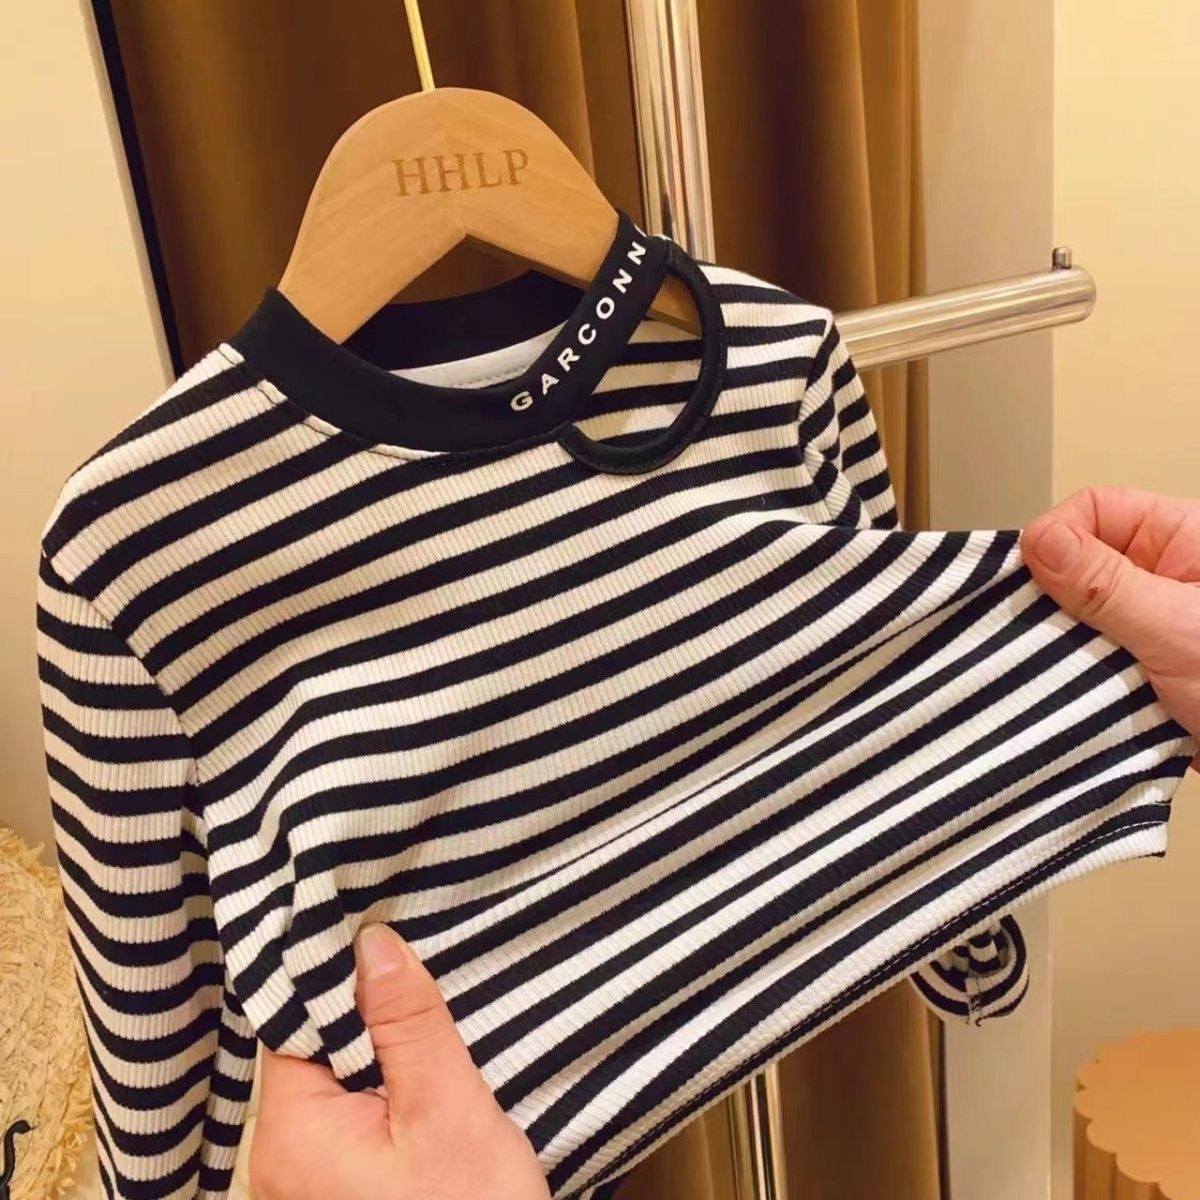 Girls'  spring and autumn clothes new letter hollow collar striped high elastic all-match foreign style bottoming shirt T-shirt top t